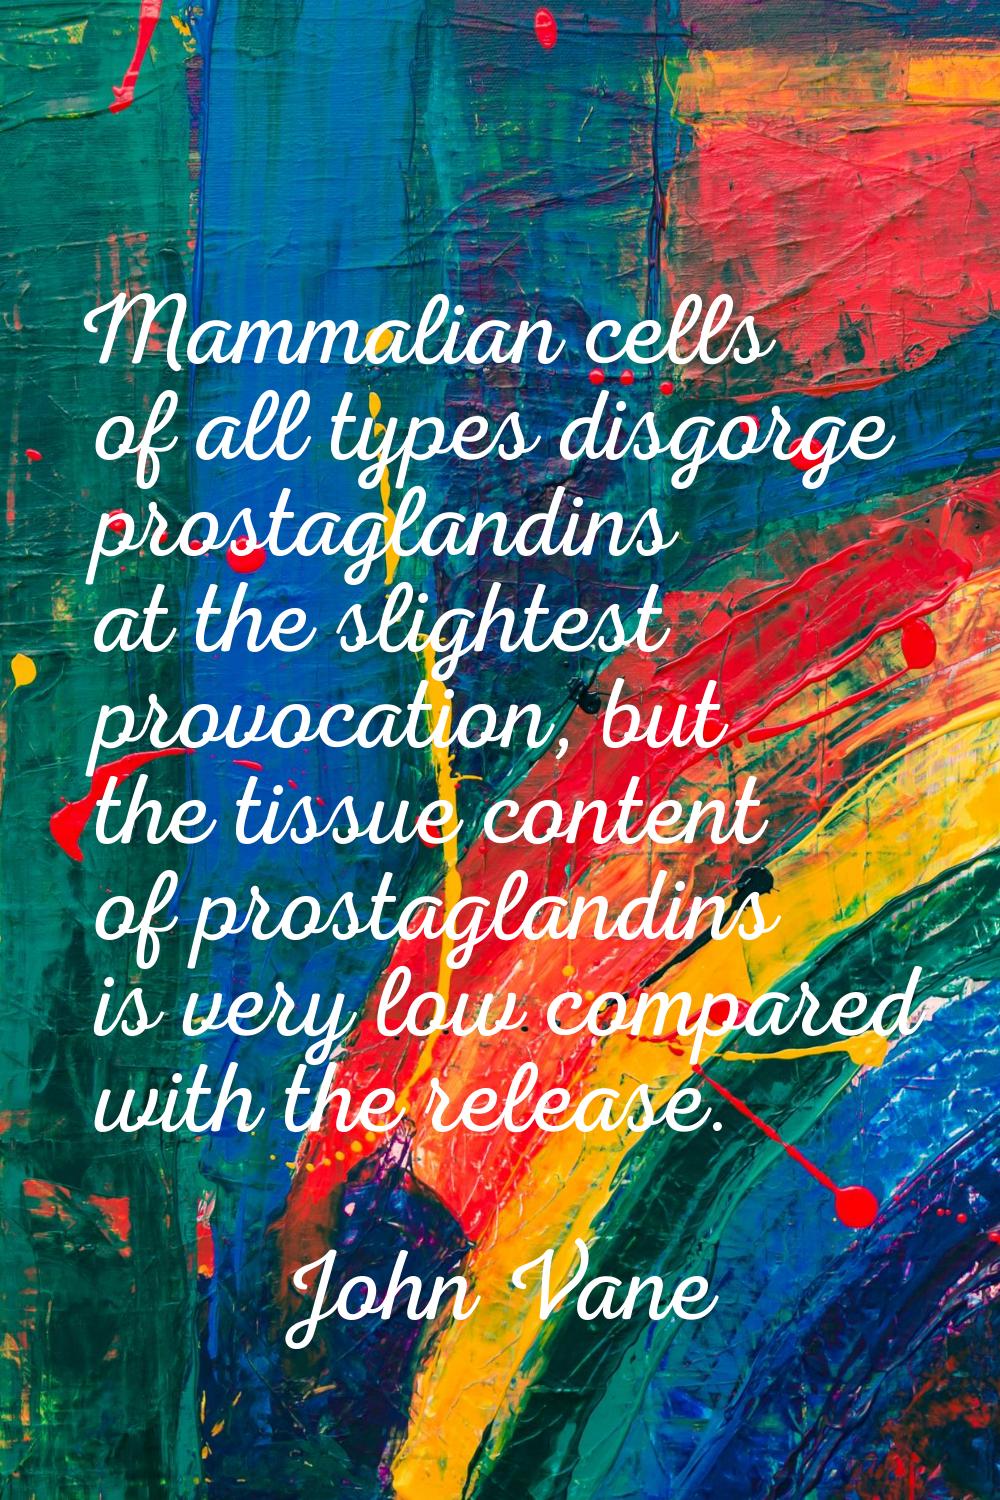 Mammalian cells of all types disgorge prostaglandins at the slightest provocation, but the tissue c